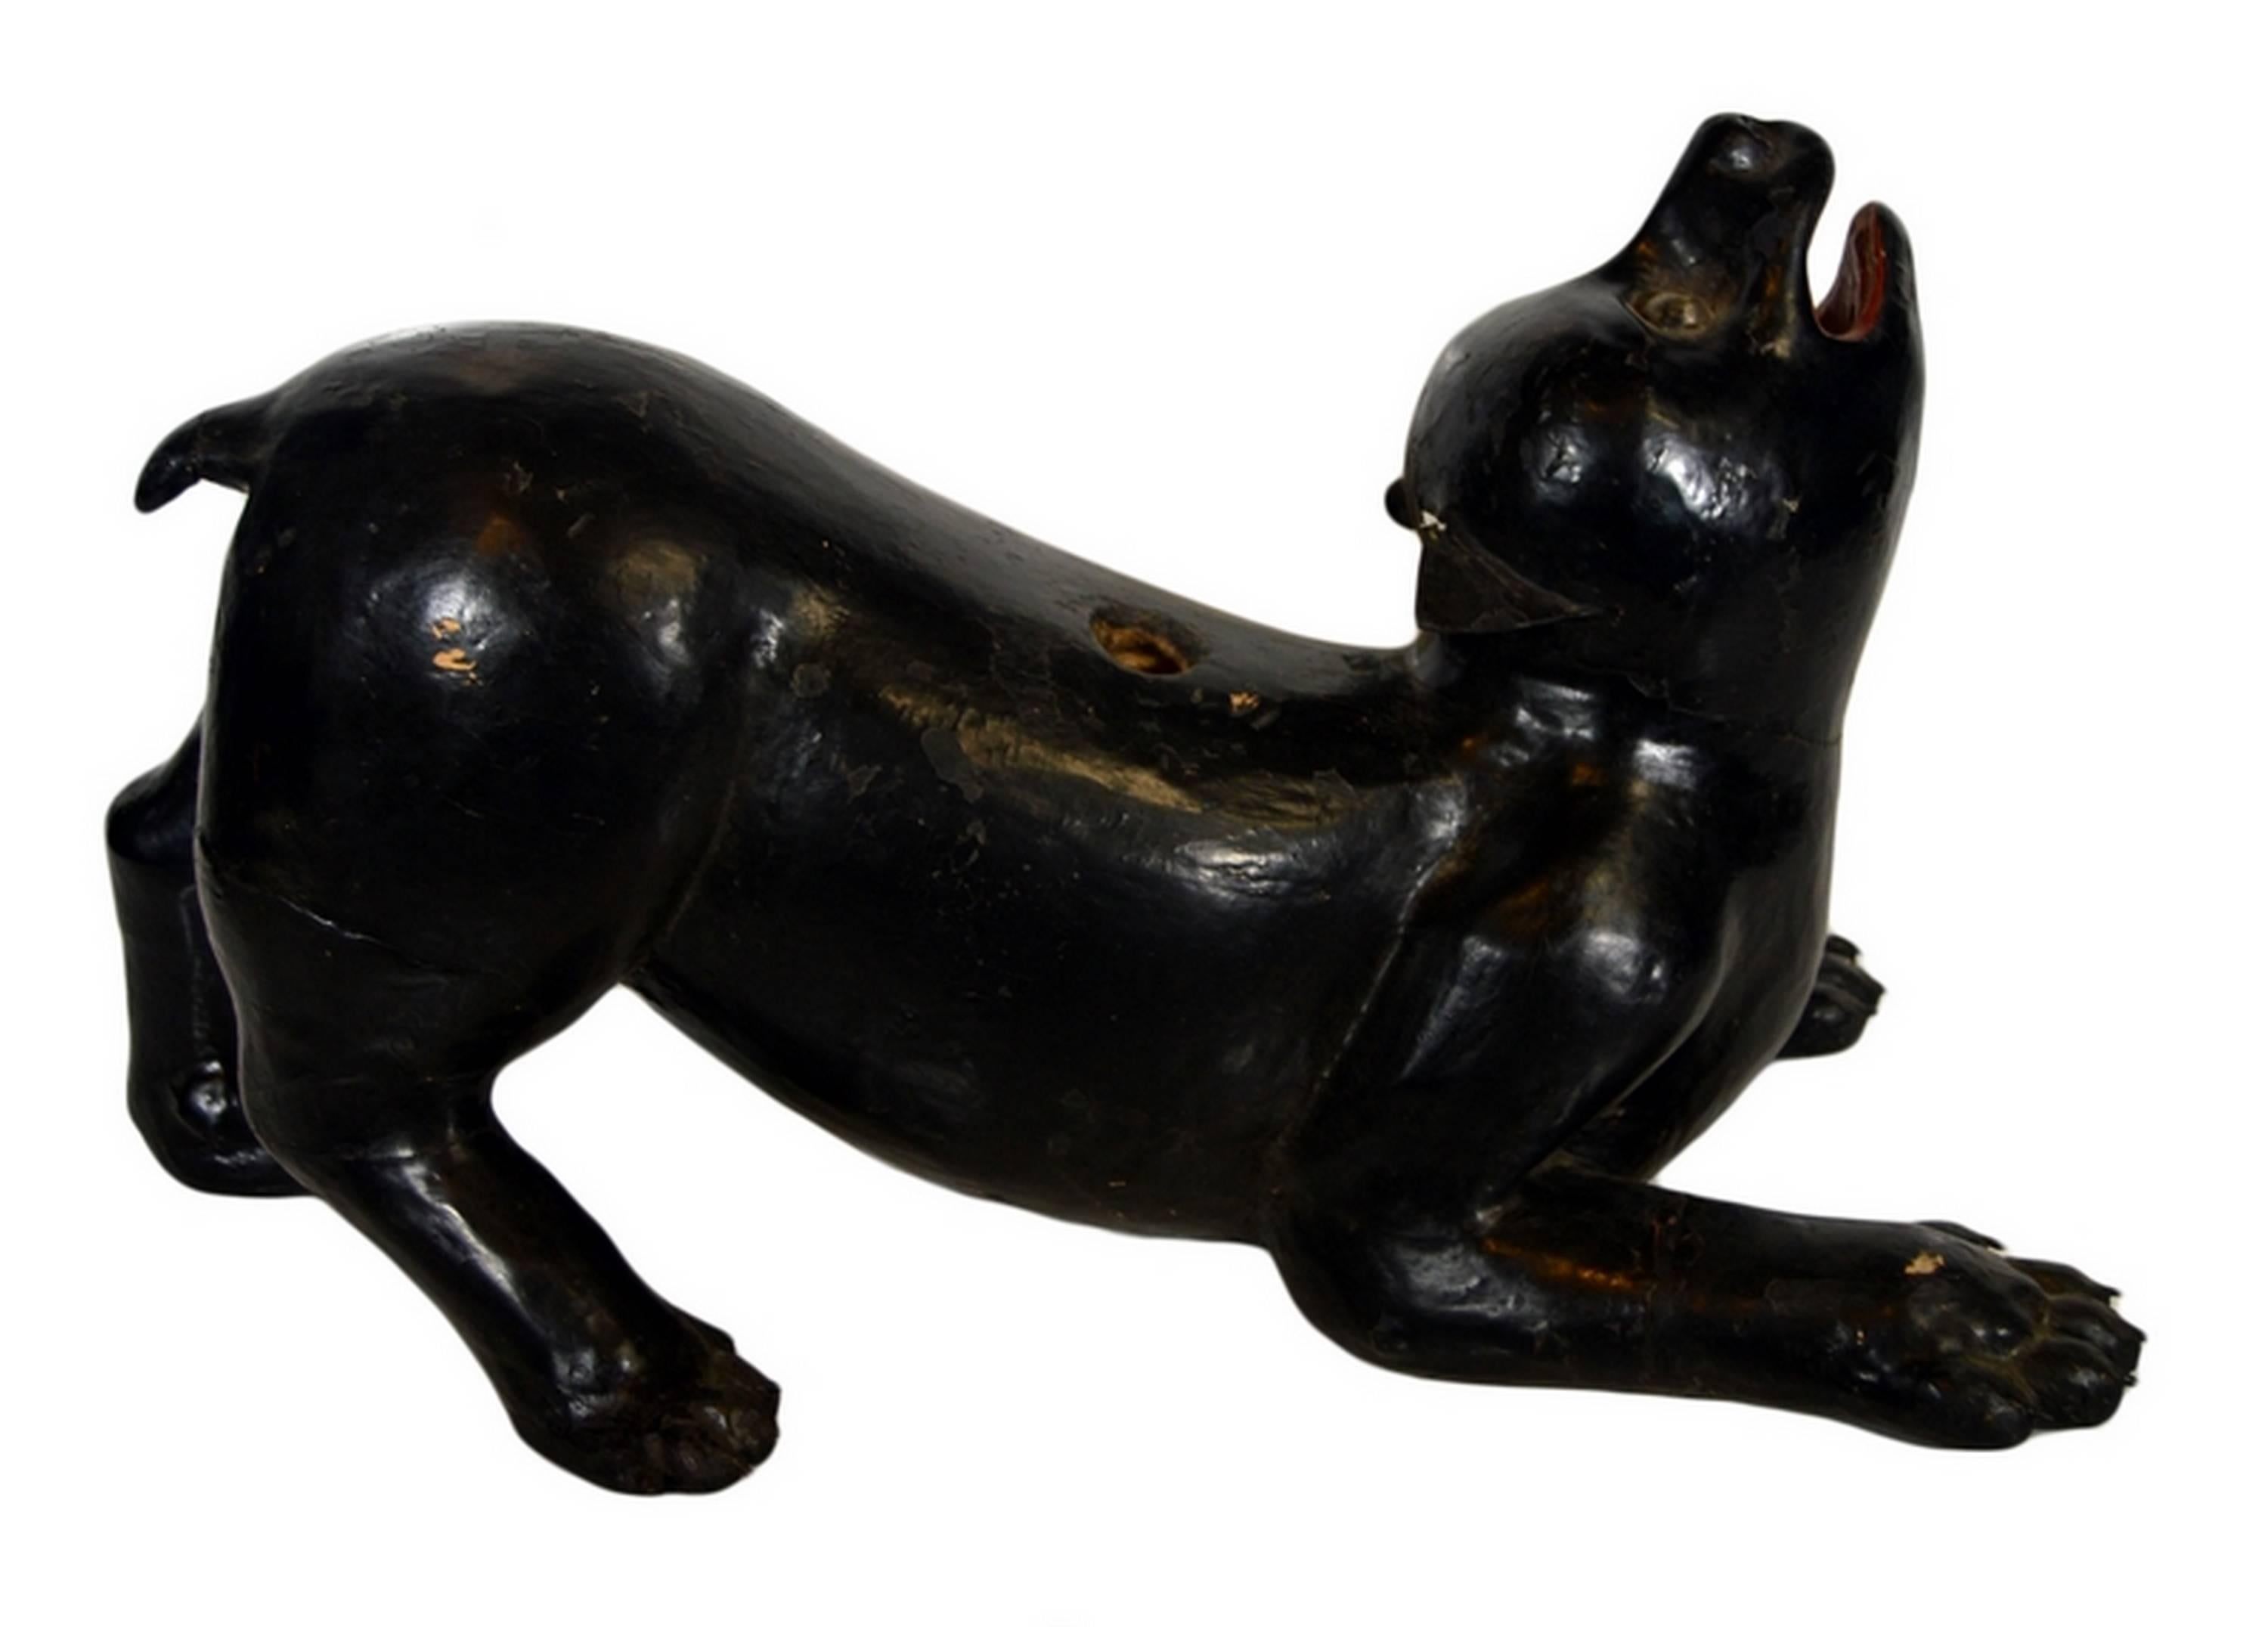 A 19th century Burmese dog temple statue hand carved in wood in Burma. This painted black dog is depicted with a lively attitude, half stretched out and barking. Its face is enlivened by the red paint added to its mouth and by the glass details of